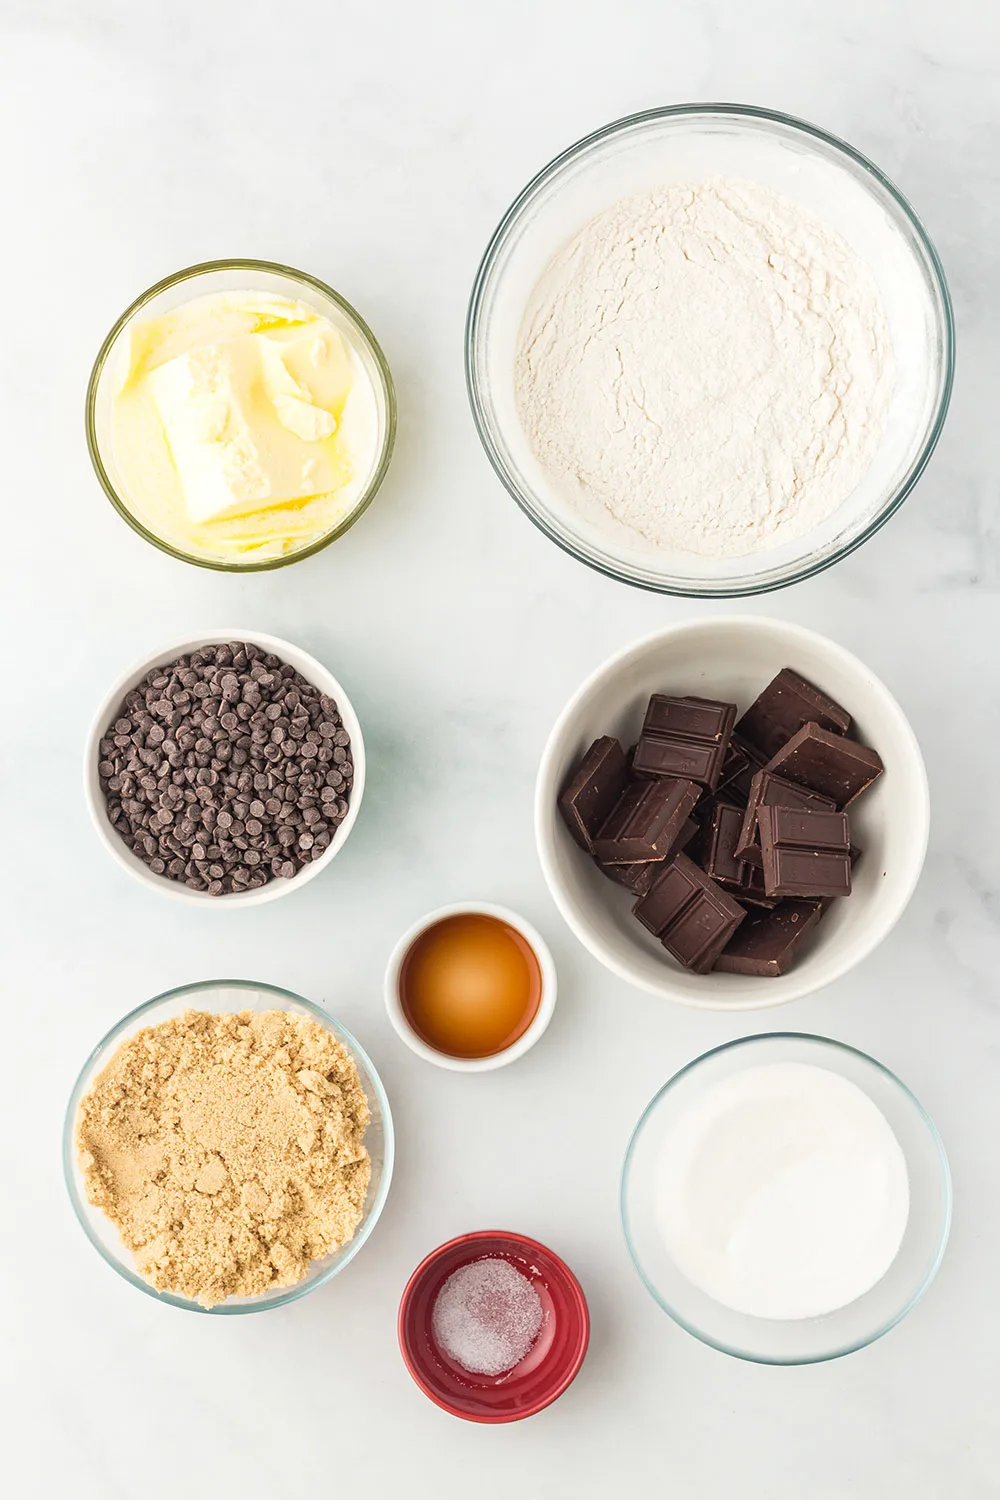 Butter, chocolate chips, and other ingredients in bowls.